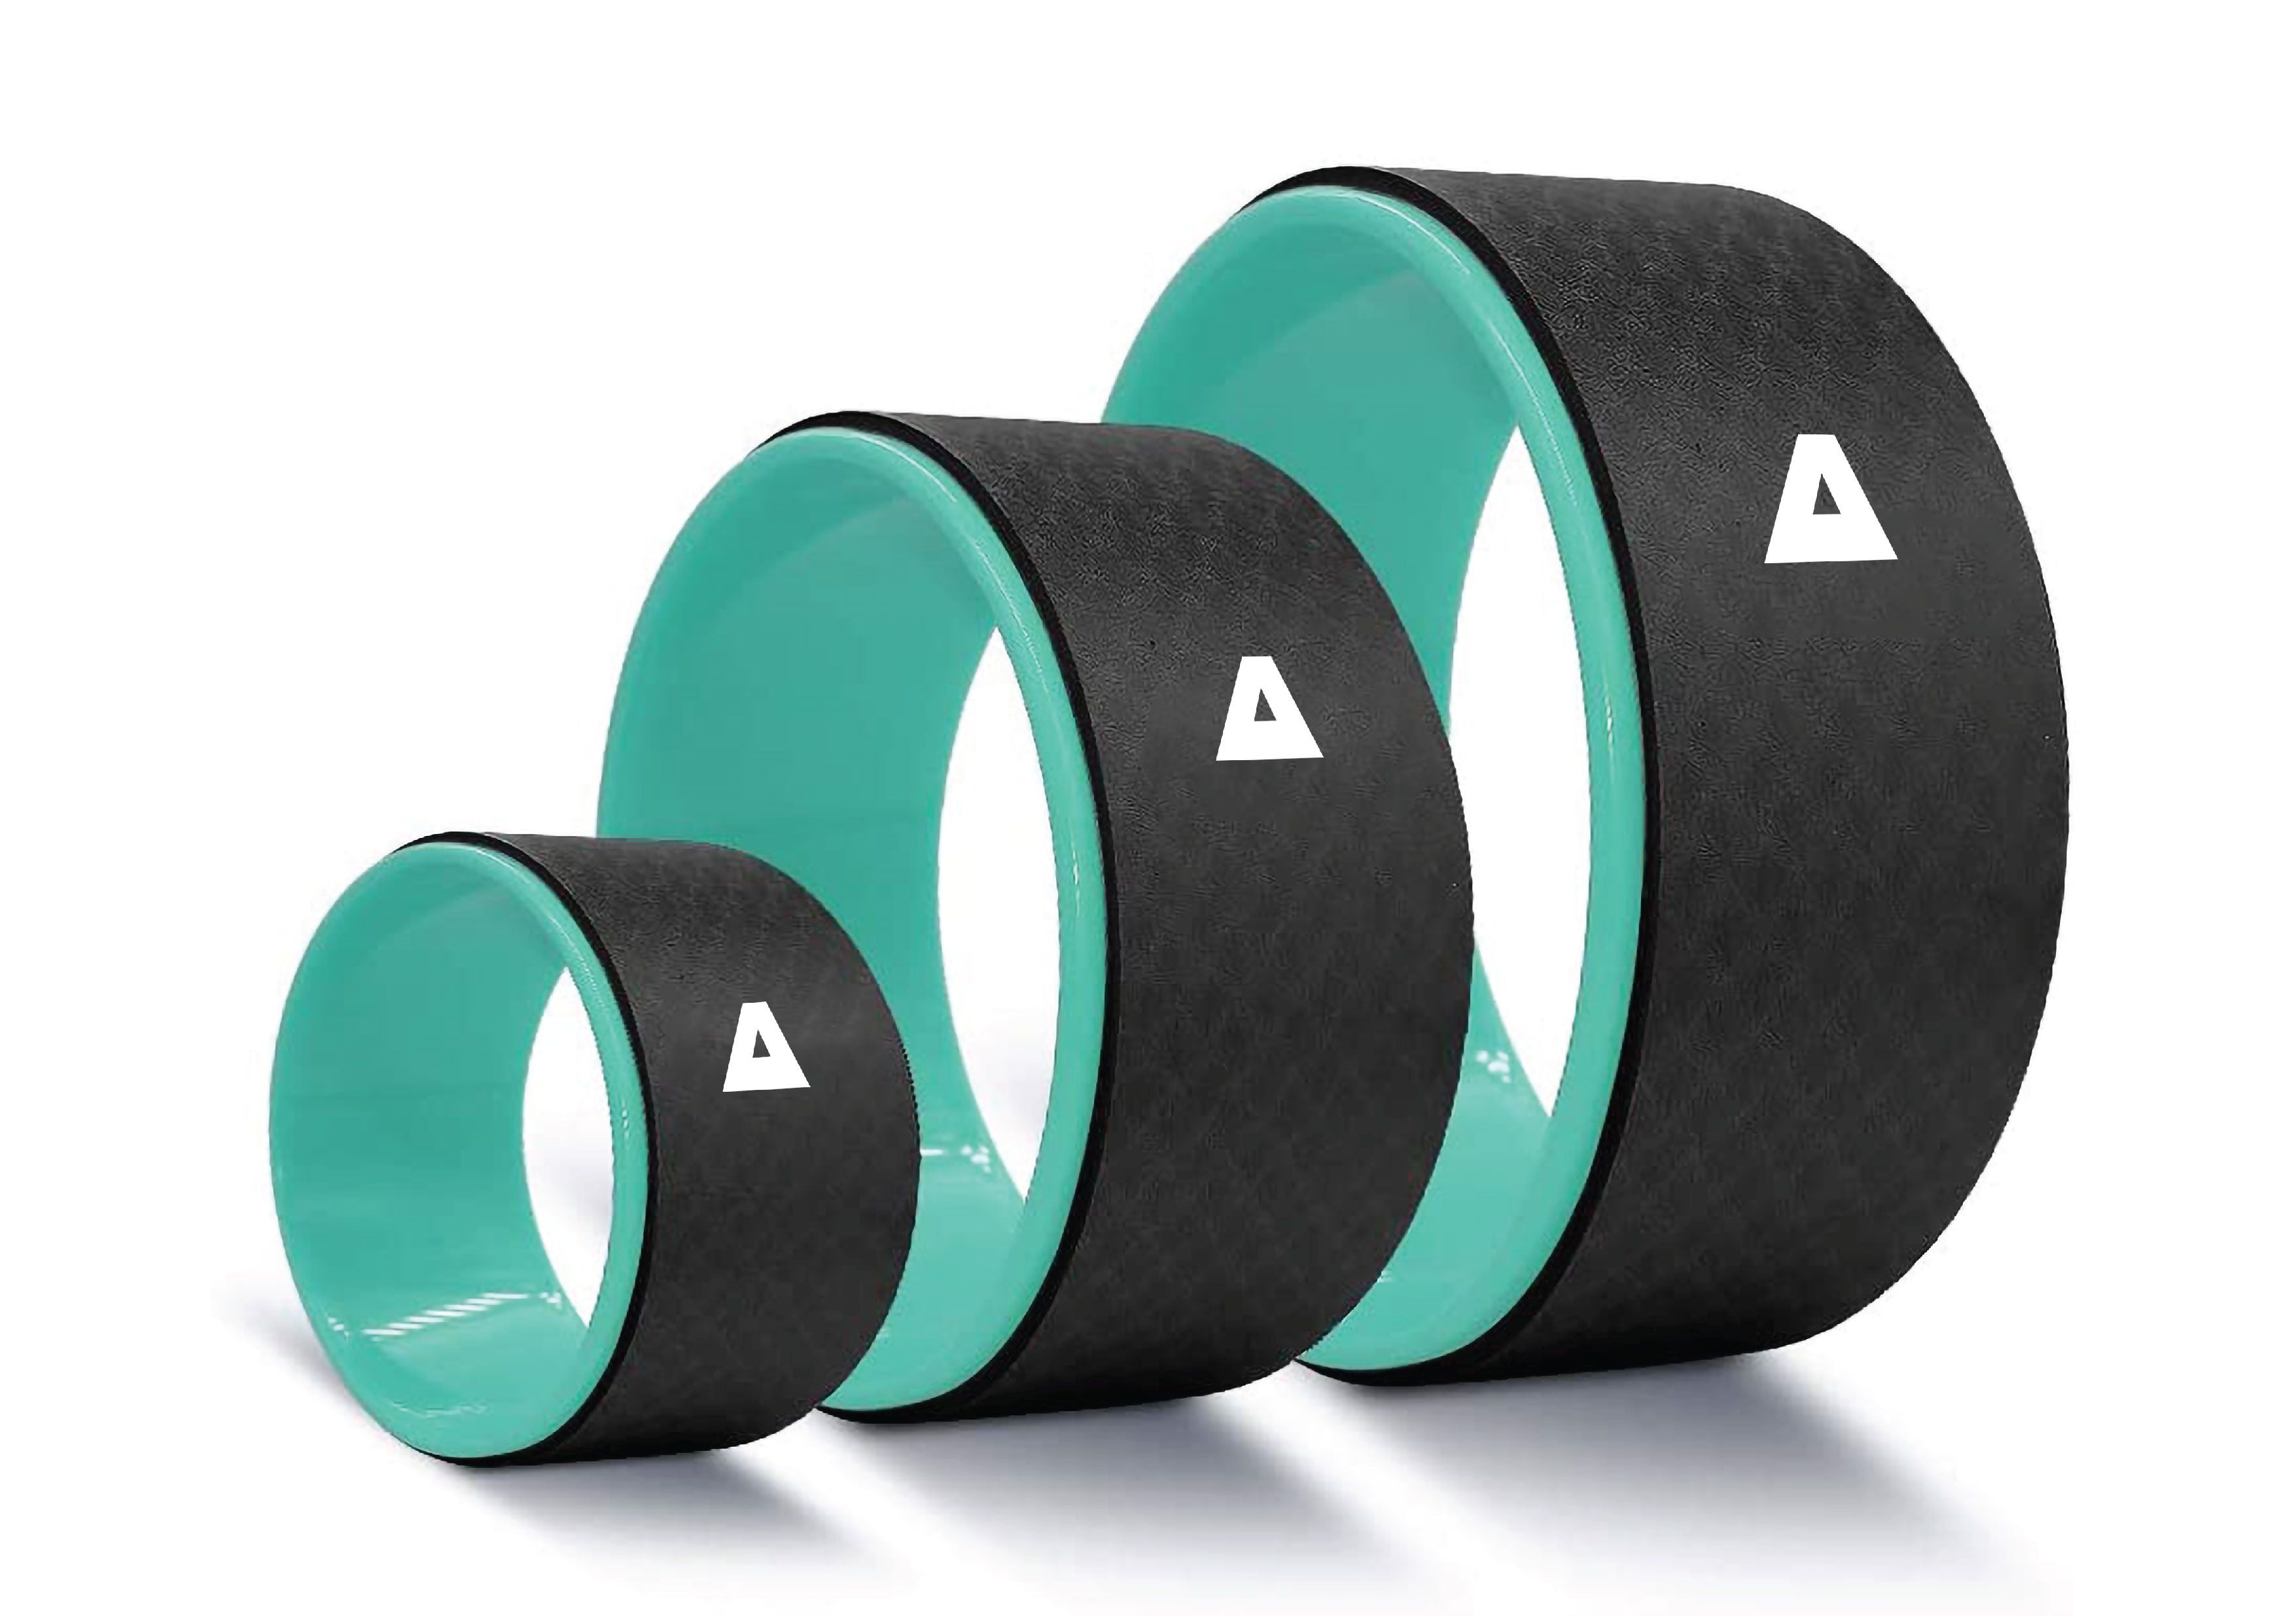 TRAKK Yoga/Fitness Wheel (3-Pack), Back Roller for Muscle Relaxation,  Stretching Back for Pain Relief, Back Pain, Massages, Cracking and Popping,  Multifunctional Yoga Wheel Back Wheel- Black/Green - Walmart.com